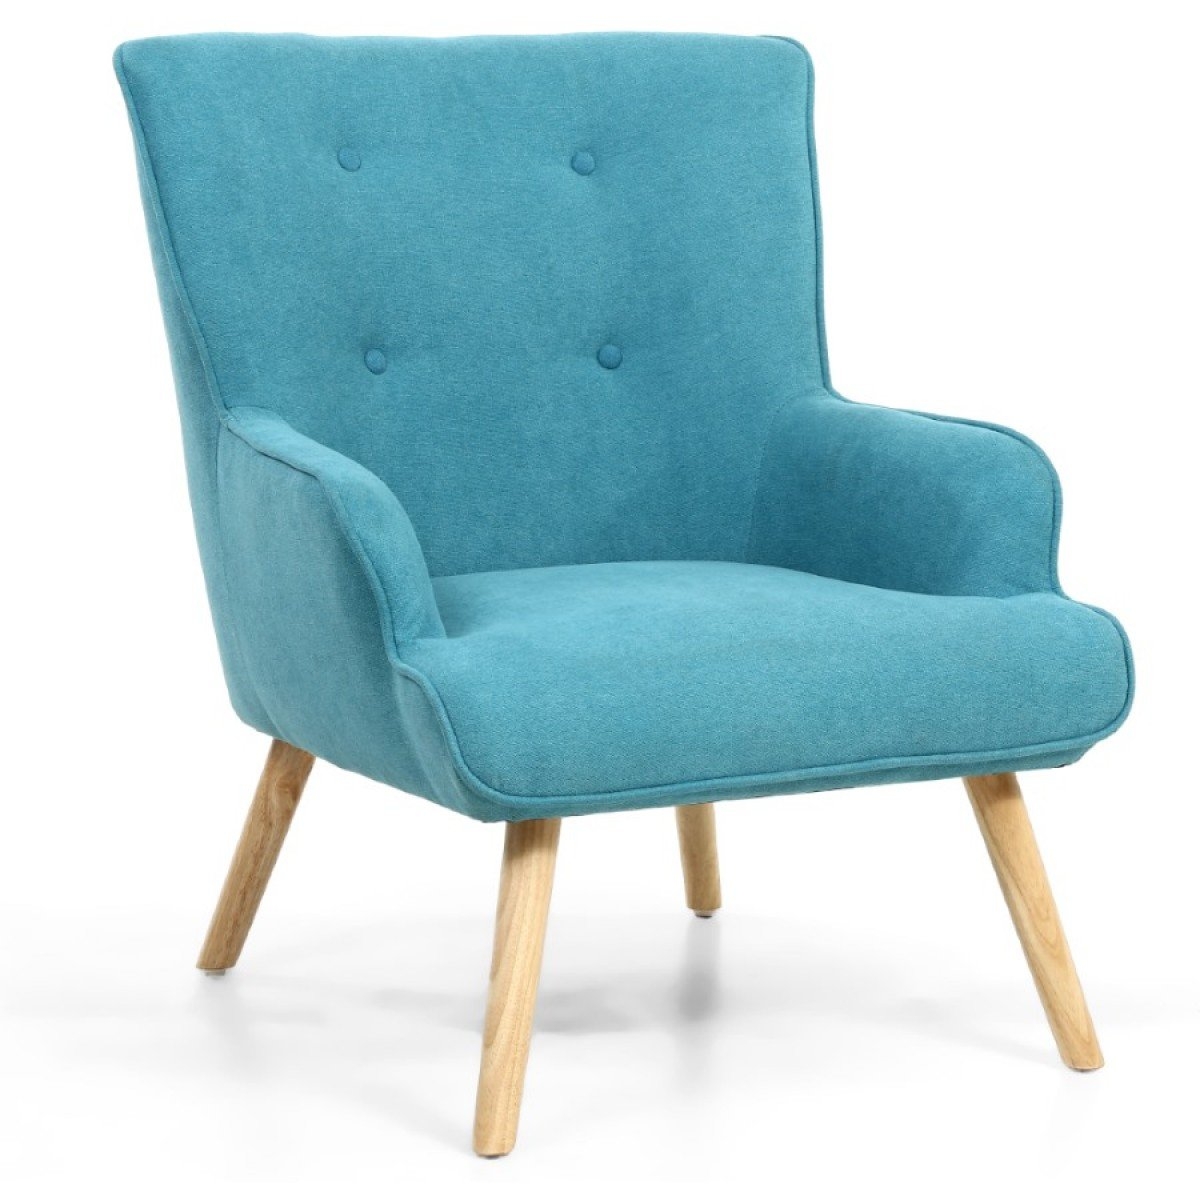 Accent Armchair in Silver Grey or Turquoise Blue – Seating – CGC Retail Outlet